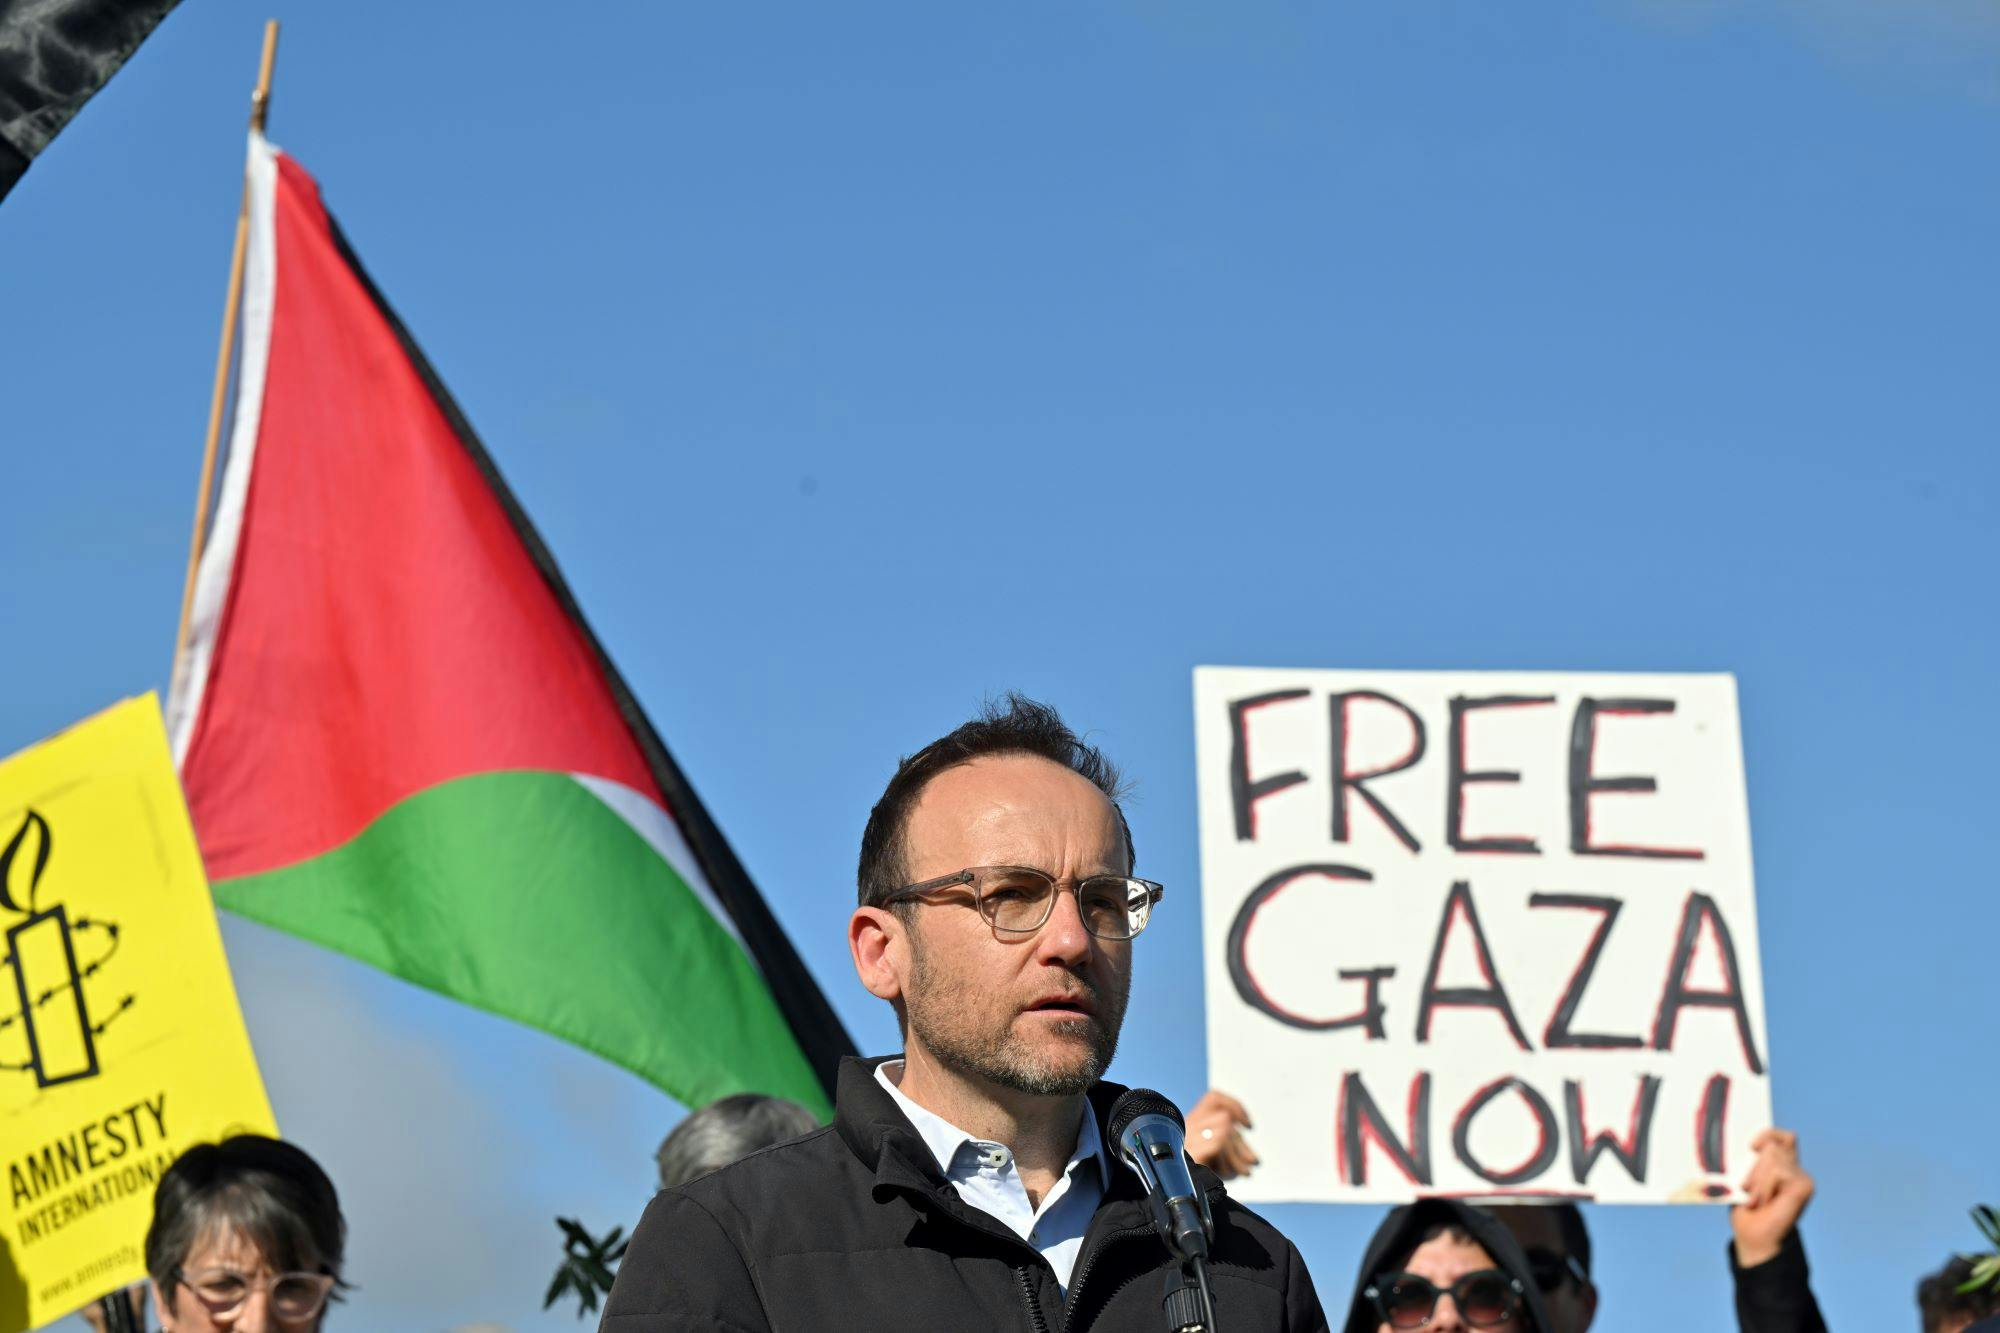 Man in front of a flag and poster reading "Free Gaza now"